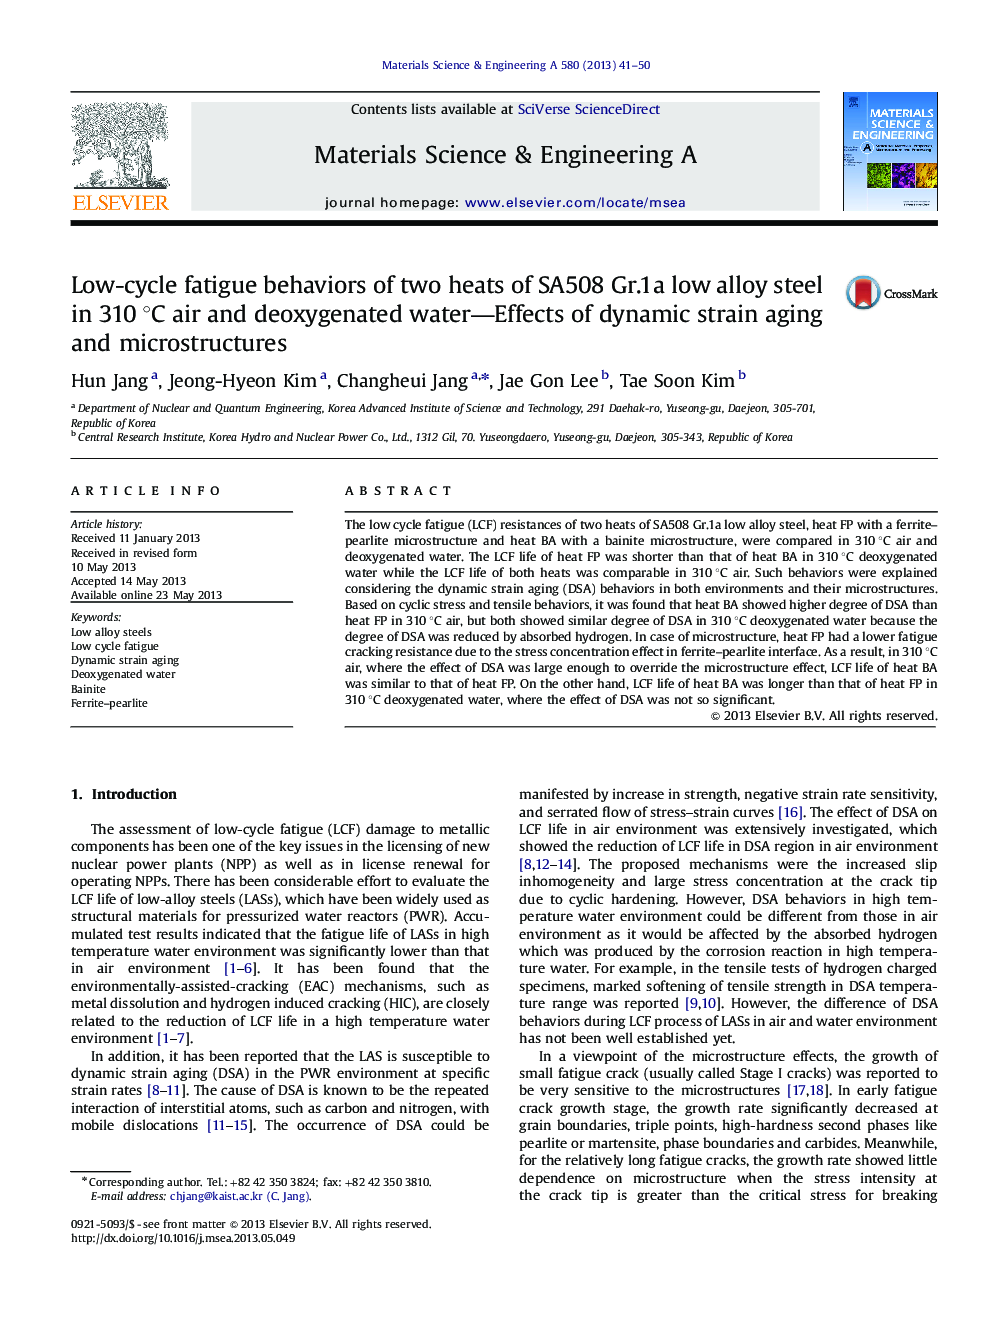 Low-cycle fatigue behaviors of two heats of SA508 Gr.1a low alloy steel in 310Â Â°C air and deoxygenated water-Effects of dynamic strain aging and microstructures